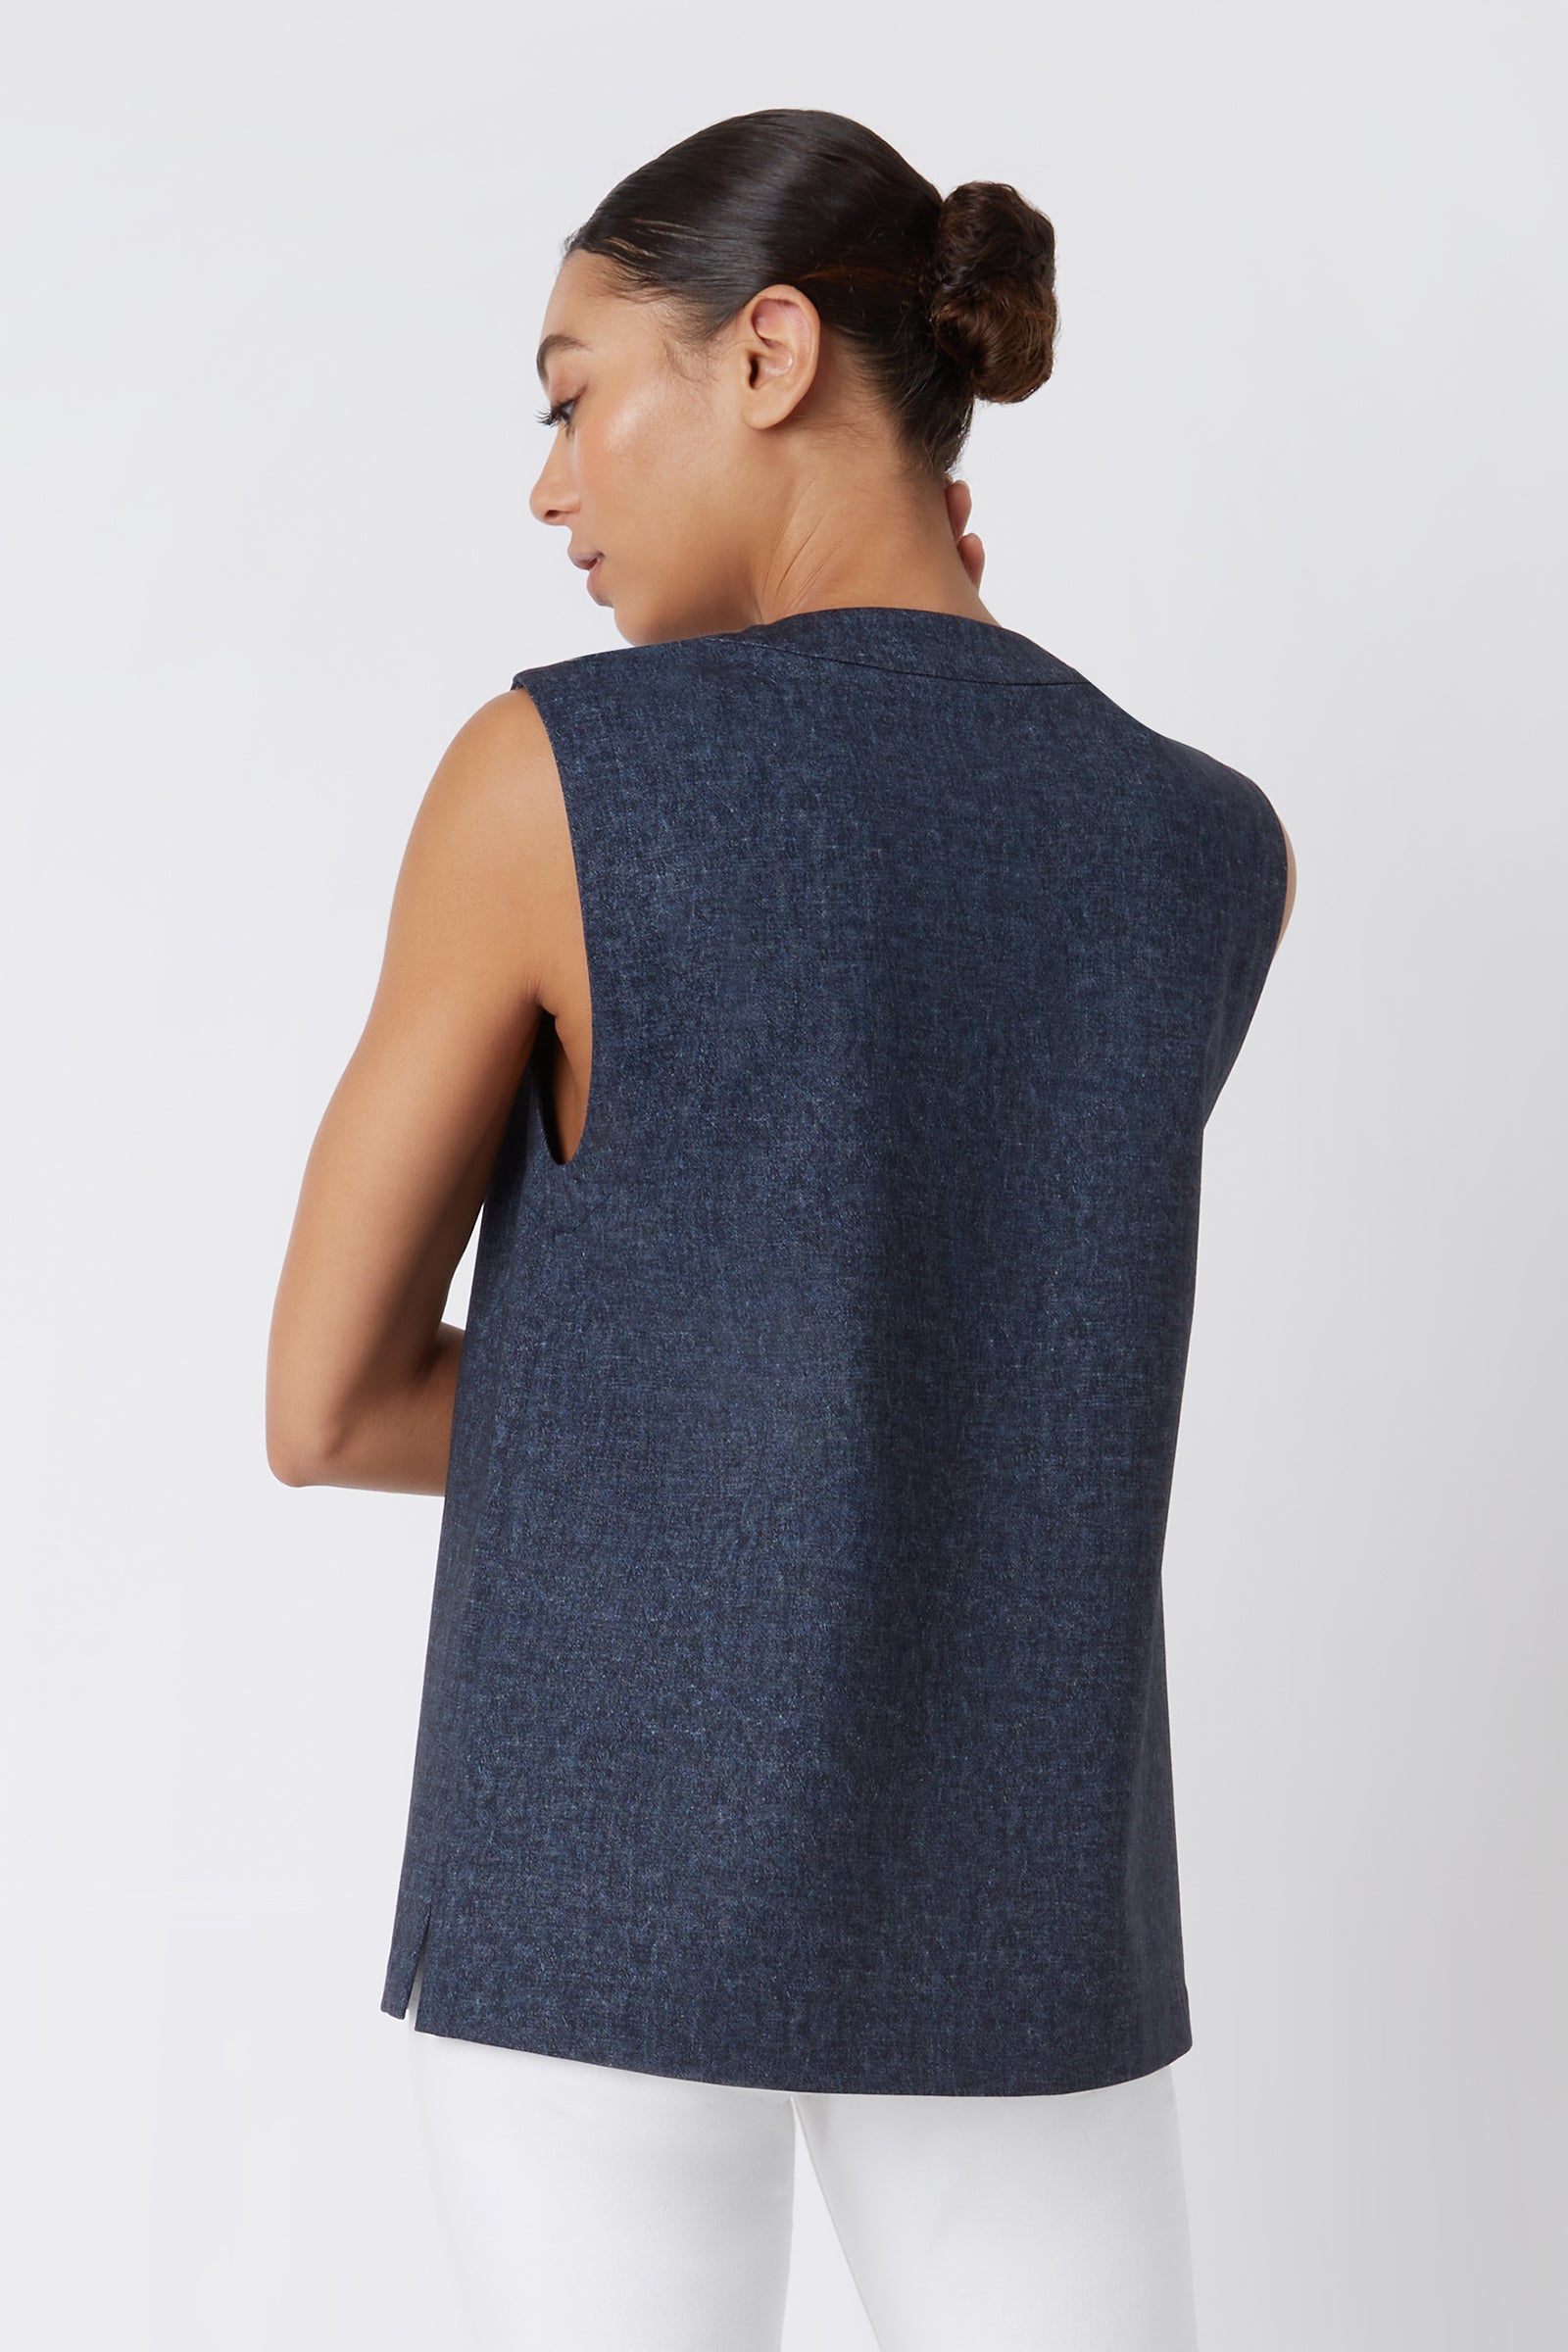 Kal Rieman Dustin Collared Vest in Navy Heather on Model Cropped Back View